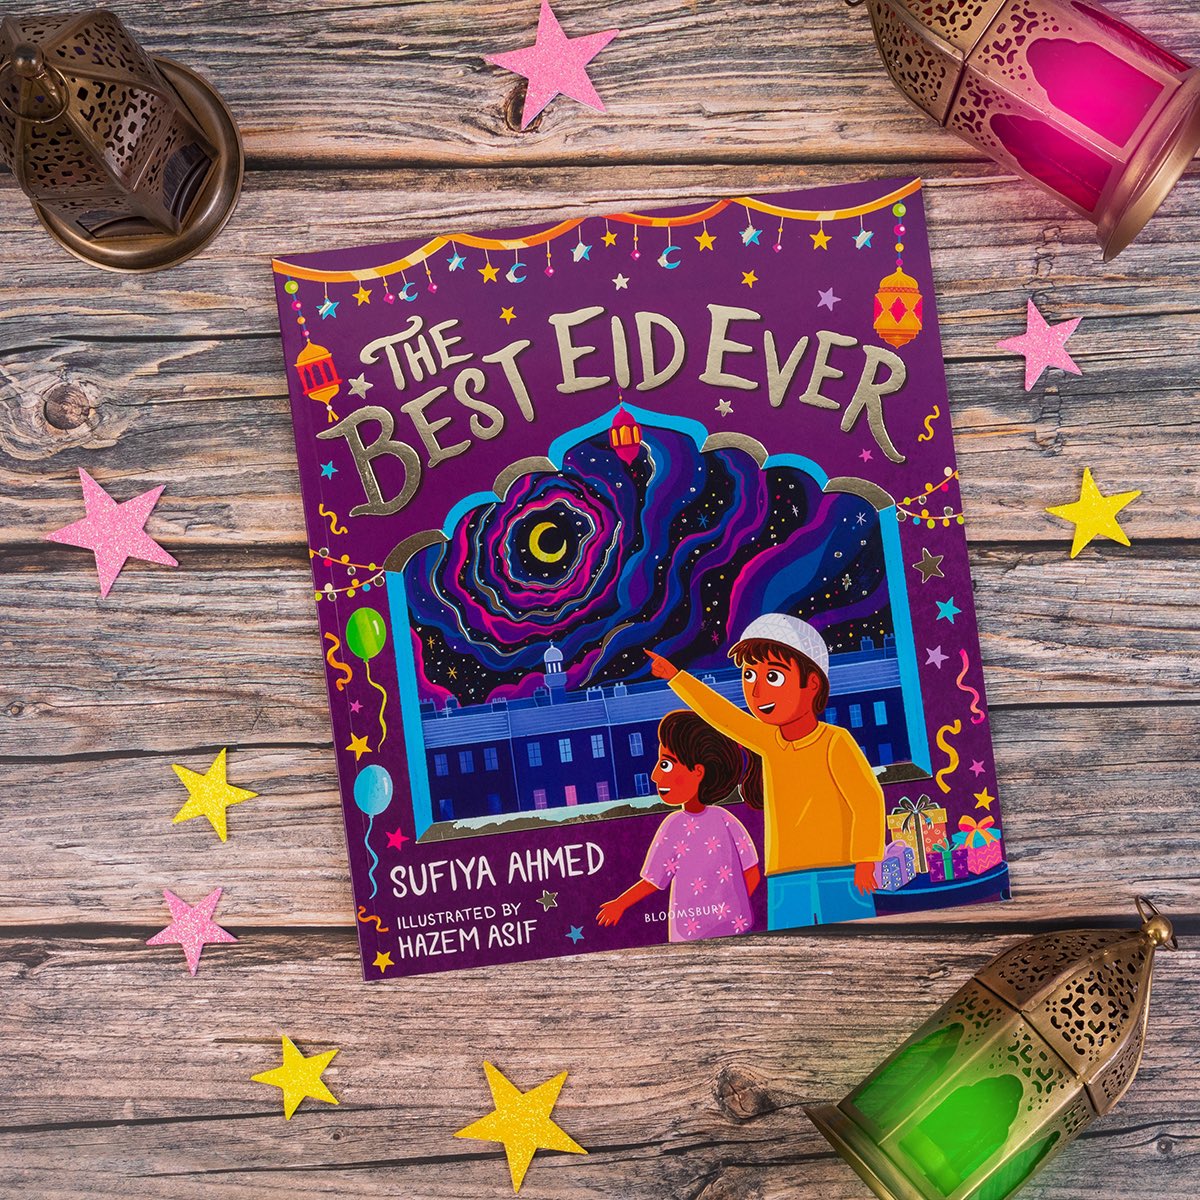 ✨ Education: The Best Eid Ever by Sufiya Ahmed @sufiyaahmed and illustrated by @AsifHazem Happy reading everyone - check out these fantastic titles online, at Bookshop.org or at your local bookshop today!